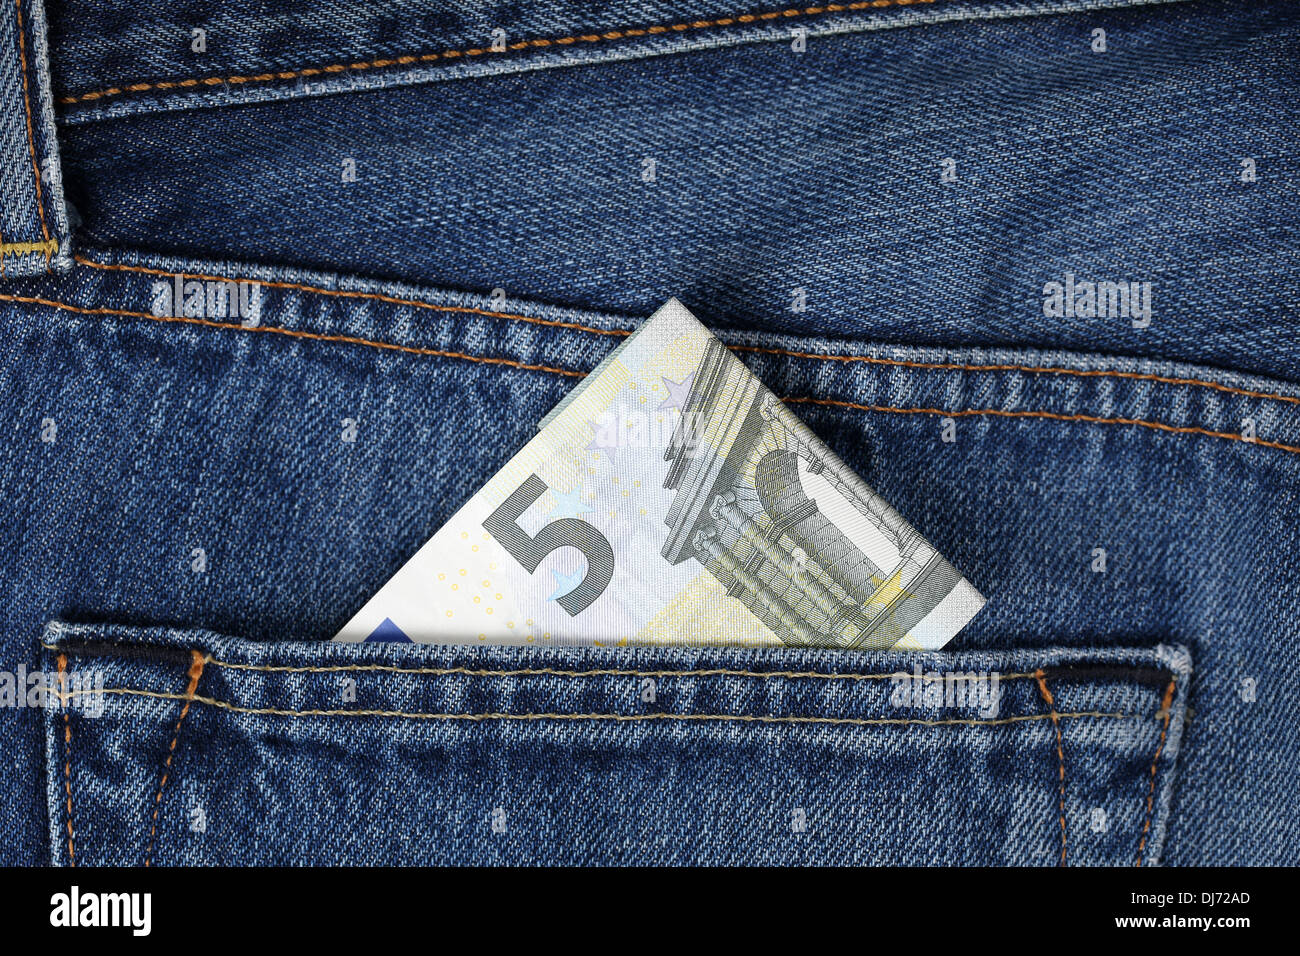 A 5 Euro banknote in a trouser pocket Stock Photo - Alamy